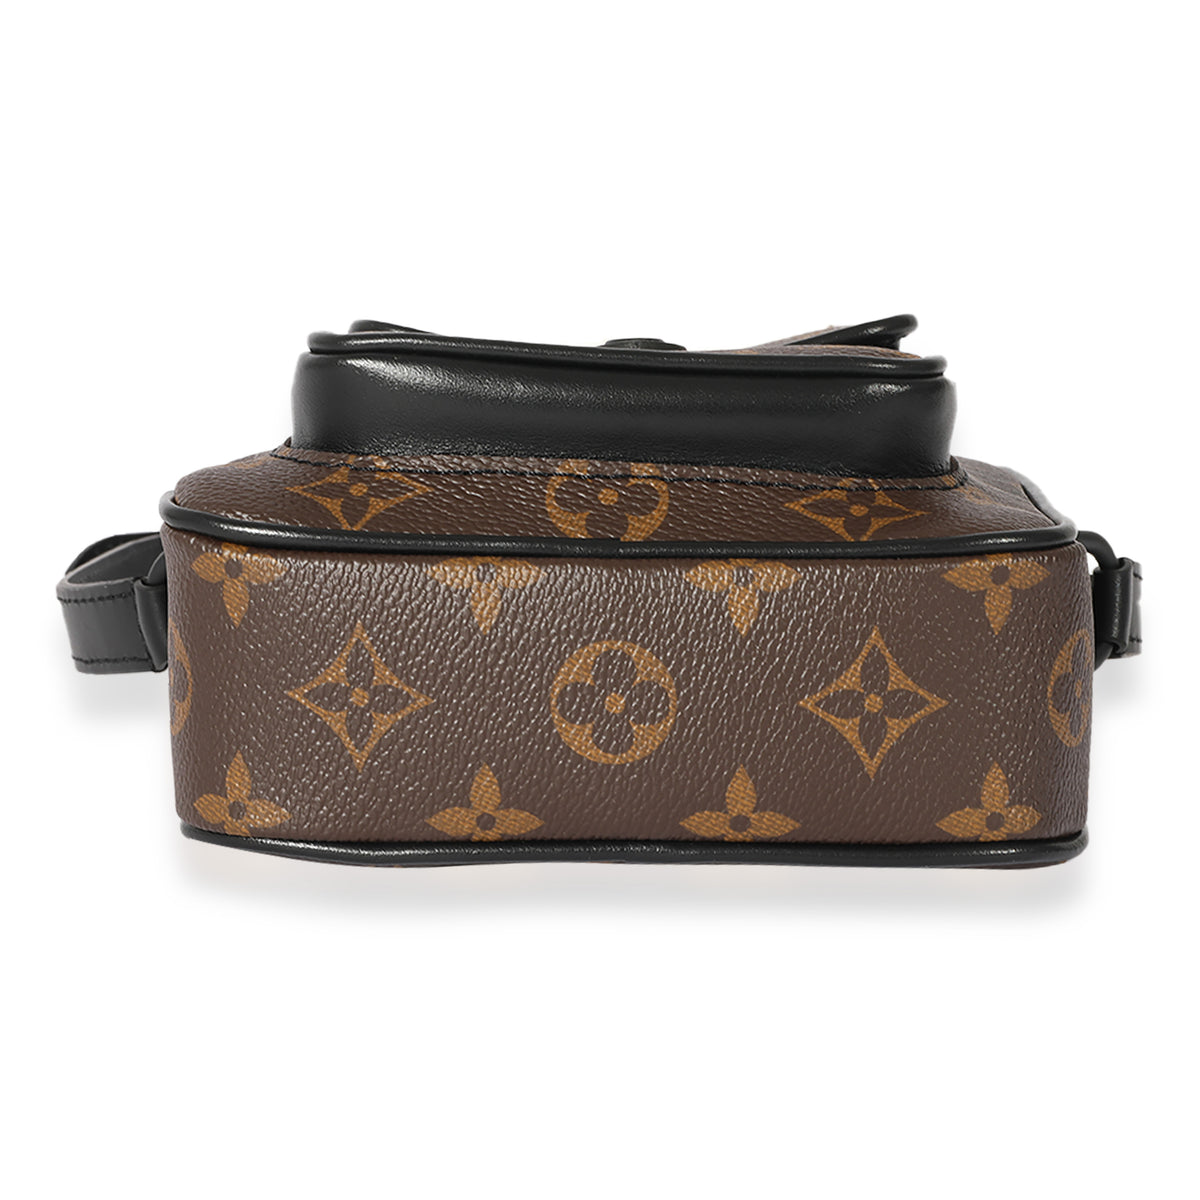 IMMIE brandname - New LV Christopher wearable อปก.